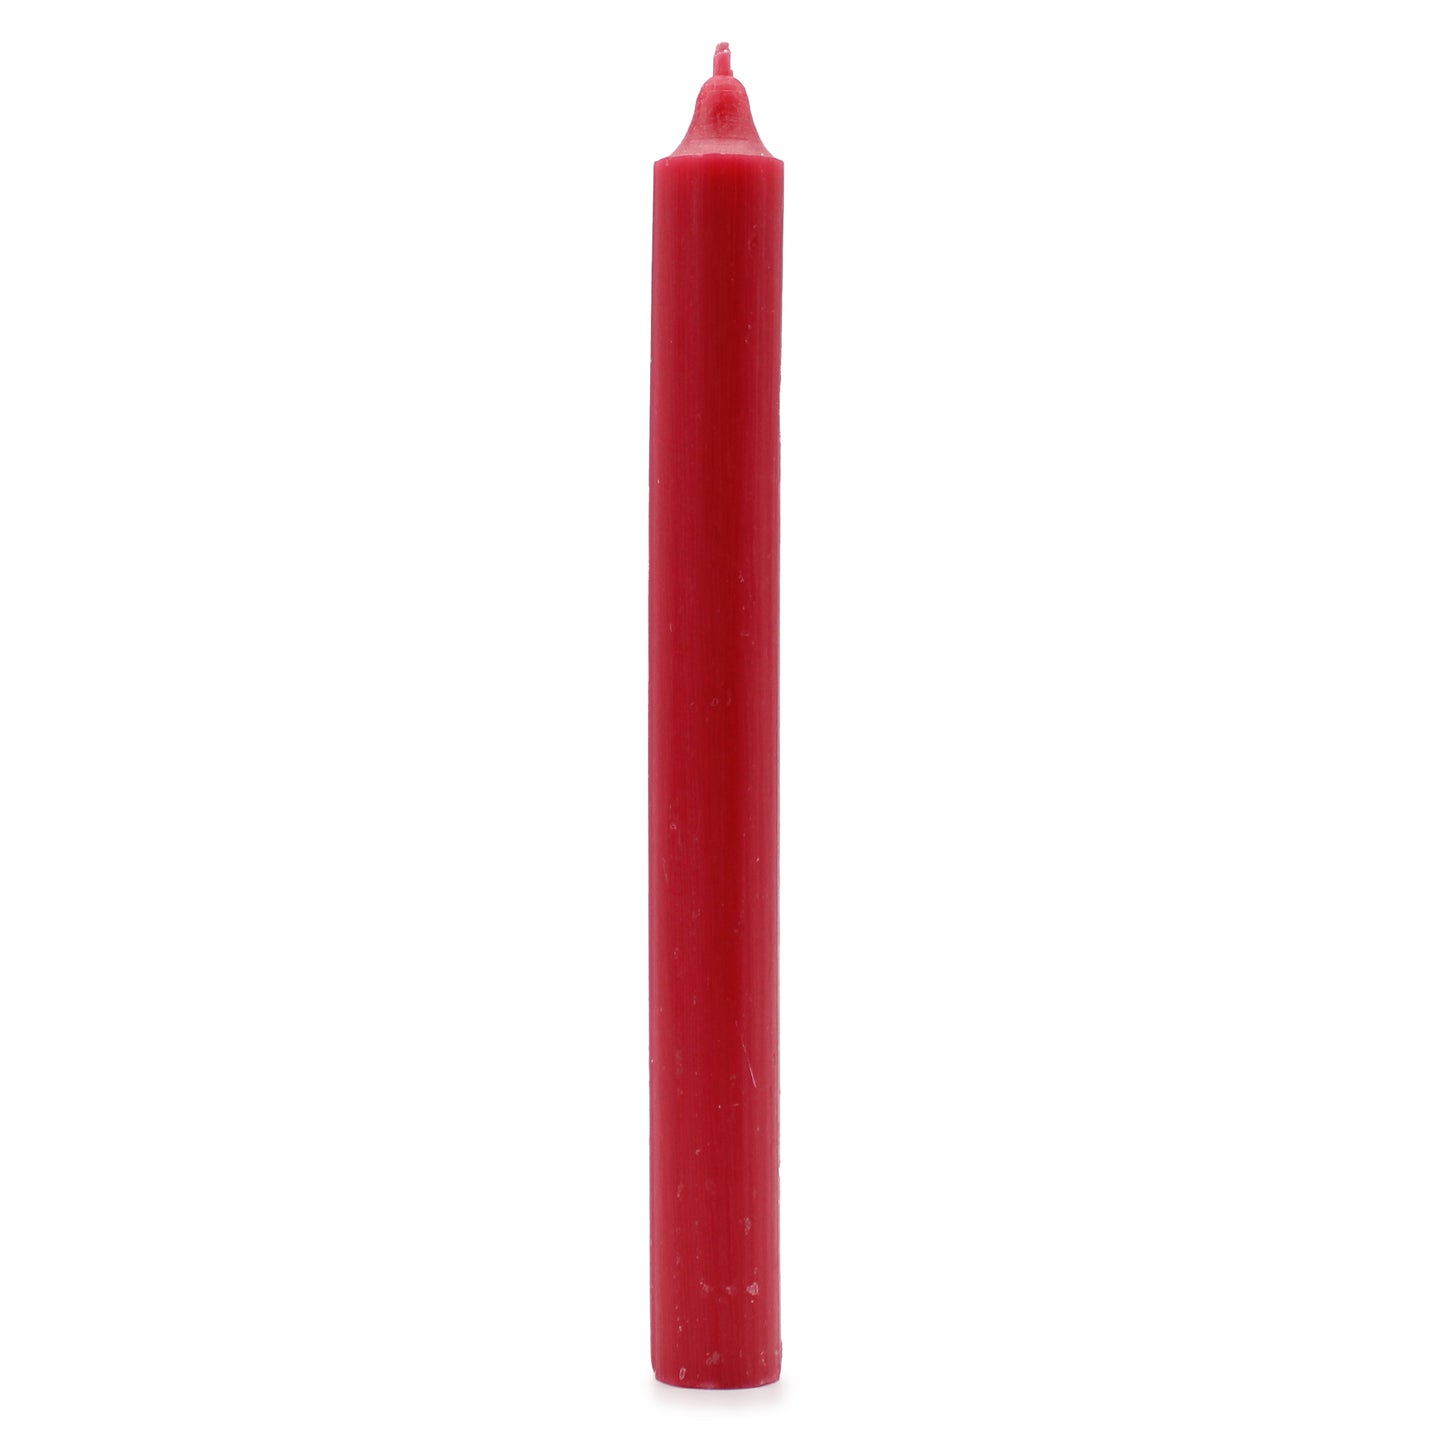 Solid Colour Dinner Candles - Rustic Red - Pack of 5